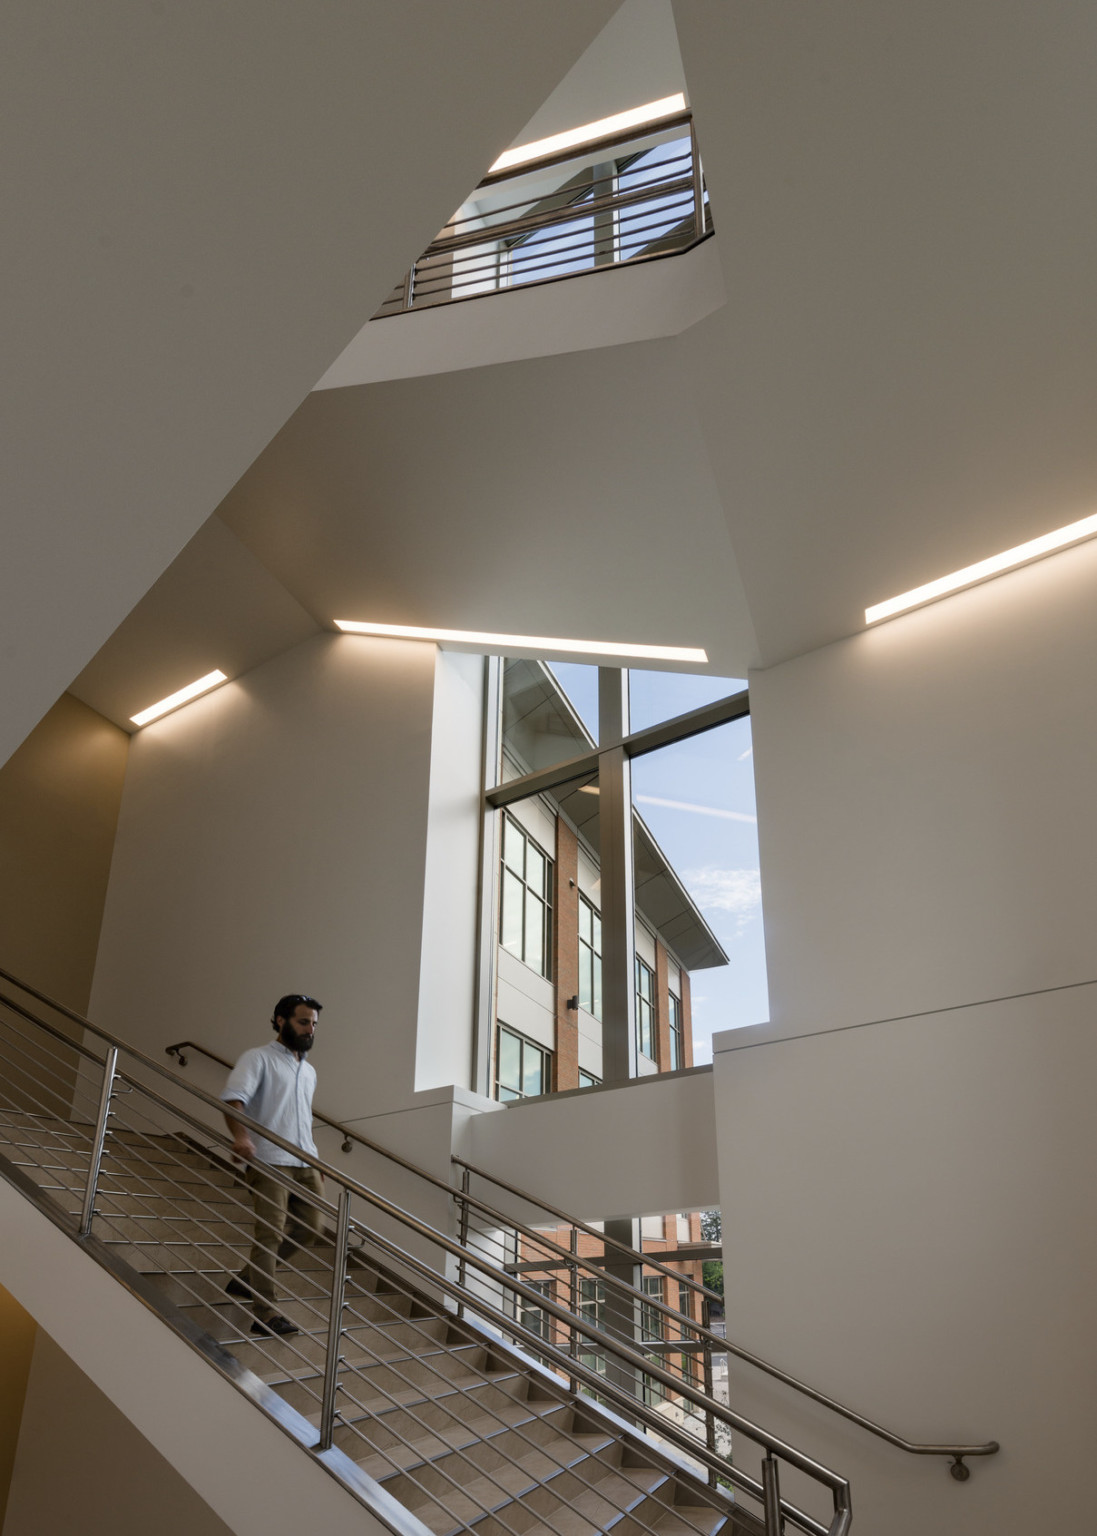 Multistory white open stairwell with light panels wrapping along edge of ceiling. Large windows run down back wall